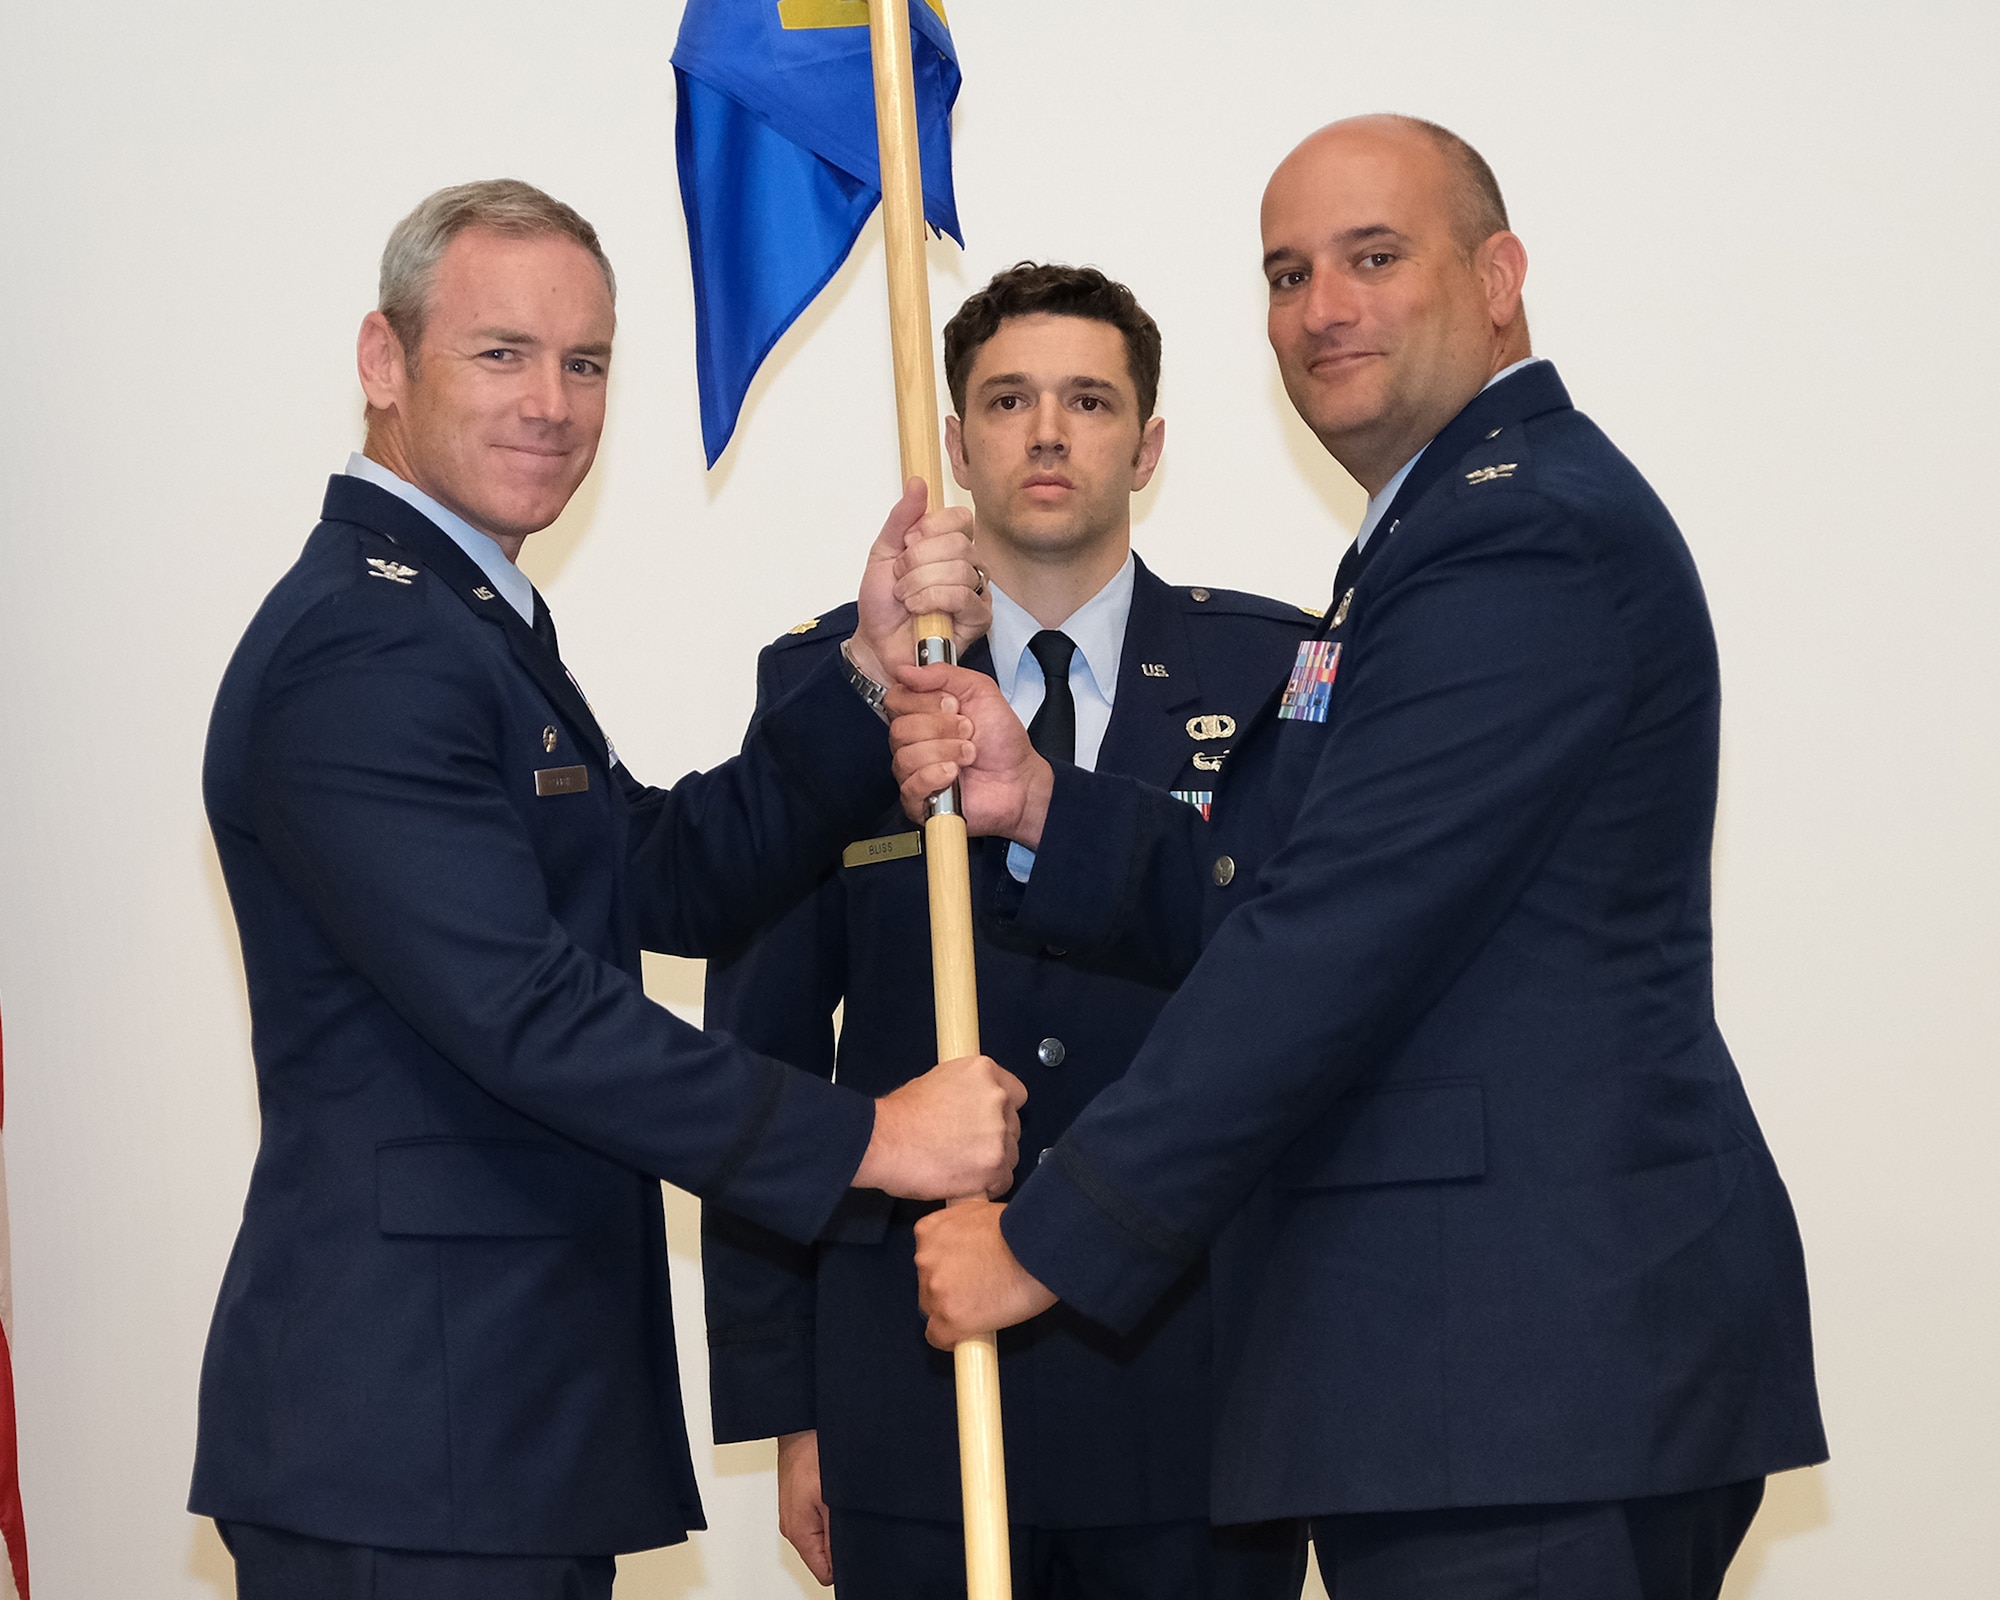 photo of three uniformed US Air Force Airmen standing on a stage, two Airmen in the forefront are both holding a unit flag while third Airman stands in background at attention